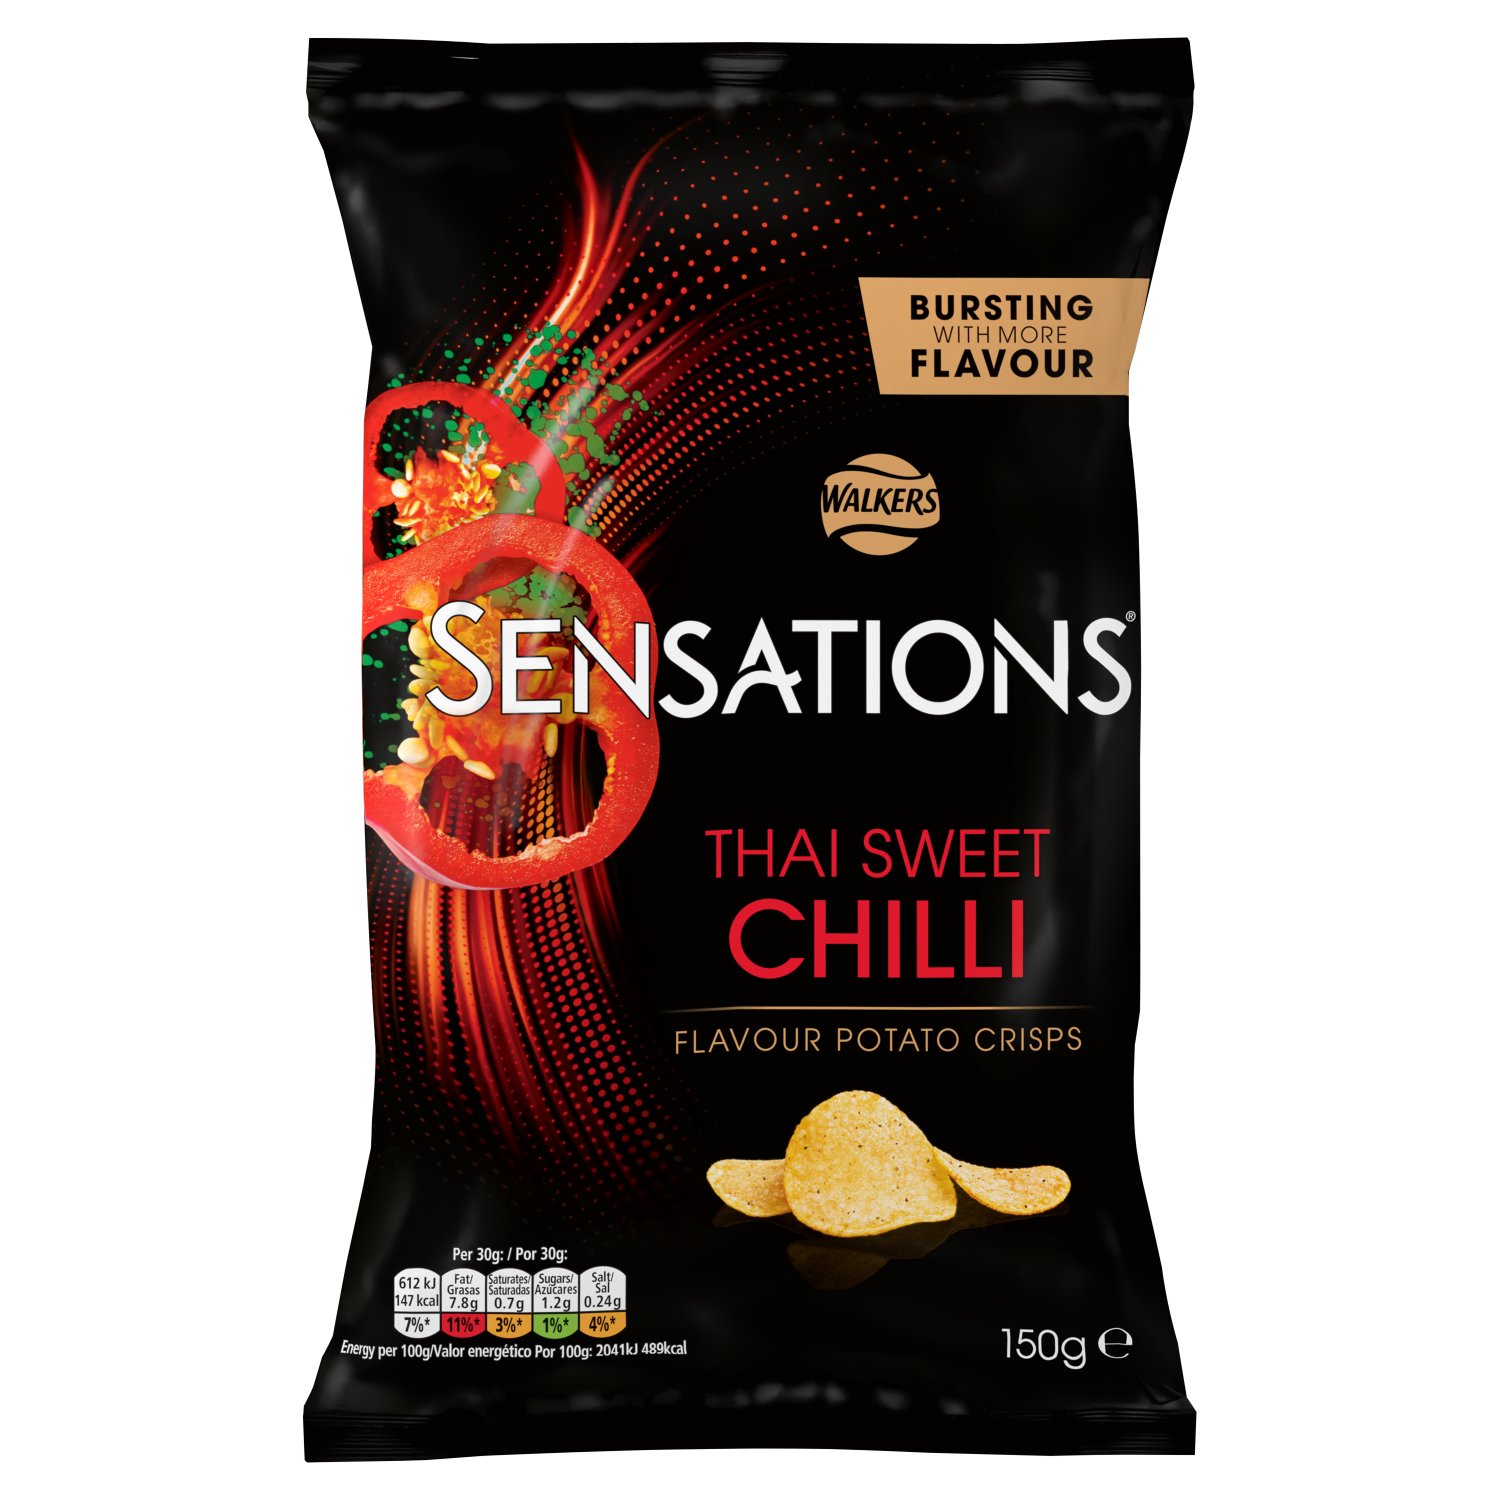 - Discover the extraordinary flavour of Sensations crisps, made with specially selected potatoes and thicker cut for a satisfying crunch
- Sensations Thai Sweet Chilli Crisps combine a subtly sweet and spicy flavour with fragrant herbs and a delicate kick to finish
- Perfect for sharing with friends
- Or serve with Sensations Peanuts for the perfect party snack platter
- Suitable for vegetarians
- Contains no artificial colours, preservatives or MSG